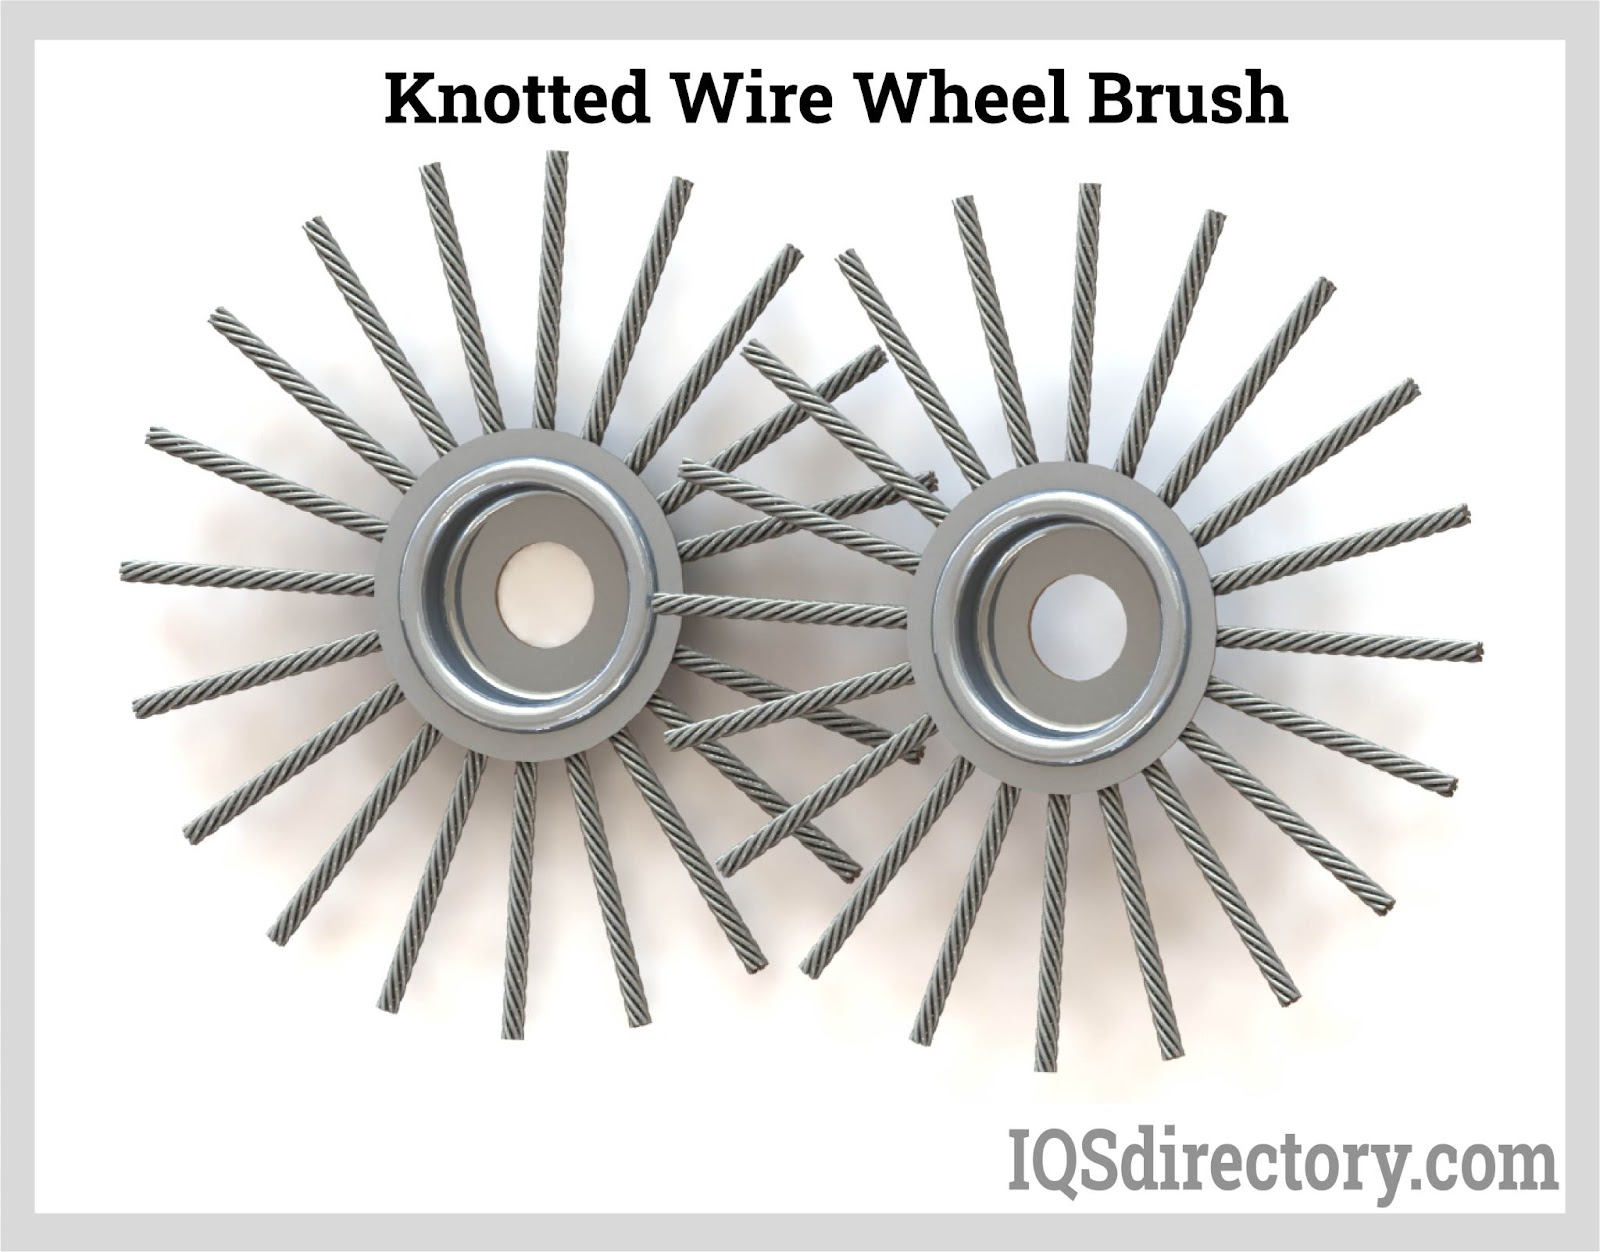 Knotted Wire Wheel Brush